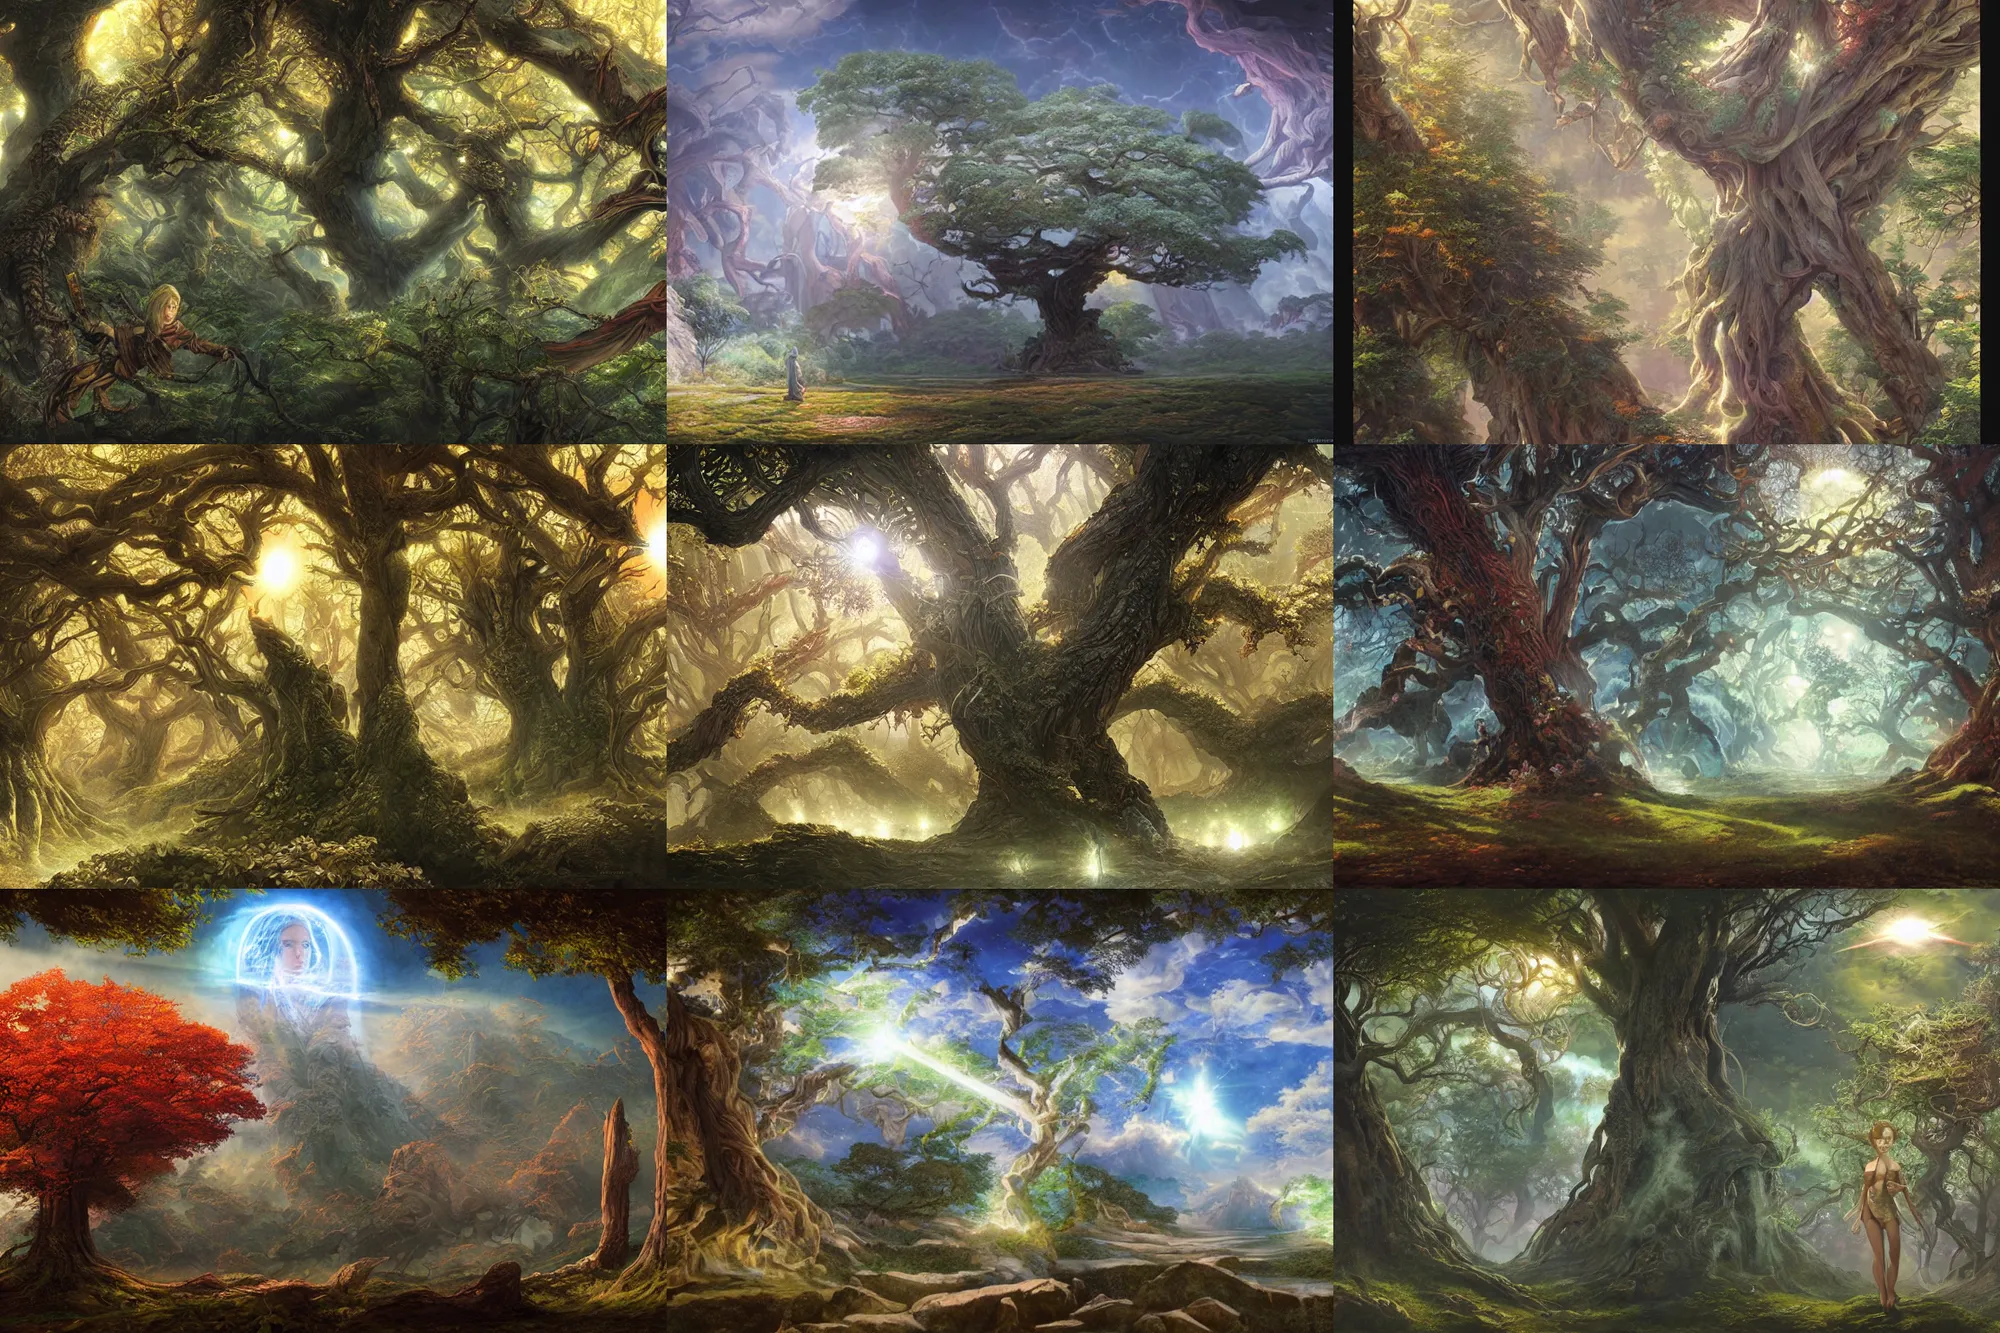 Wise mystical tree variations : r/dalle2